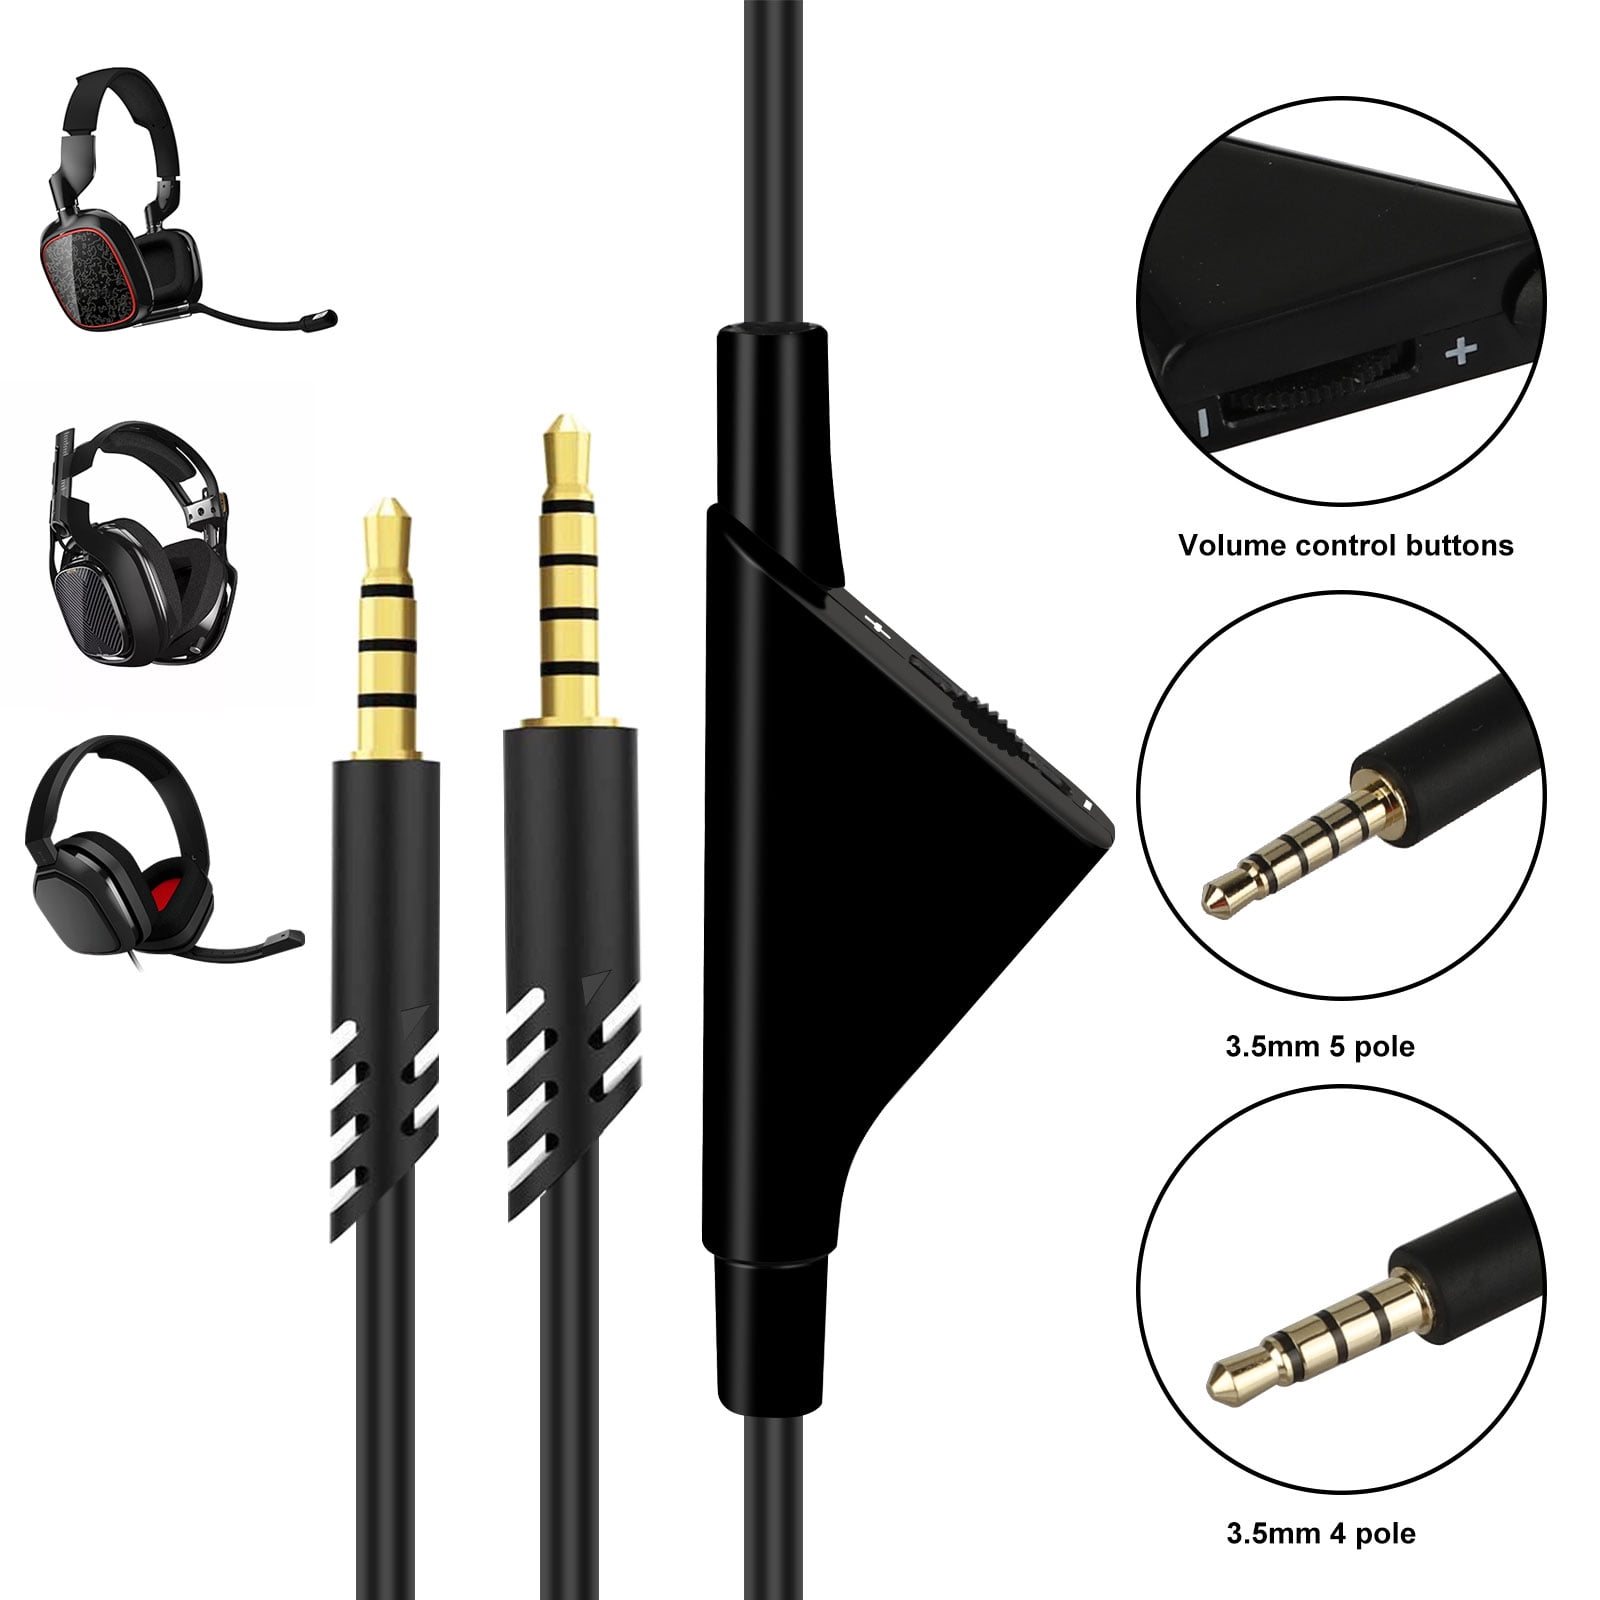 for Astro A10 A40 Headset Cable, A10 Volume Cable Compatible with Astro A10/A40 Gaming Headsets Xbox One Ps4 Controller Headphone Audio Cable 6.5 Feet Black - Walmart.com